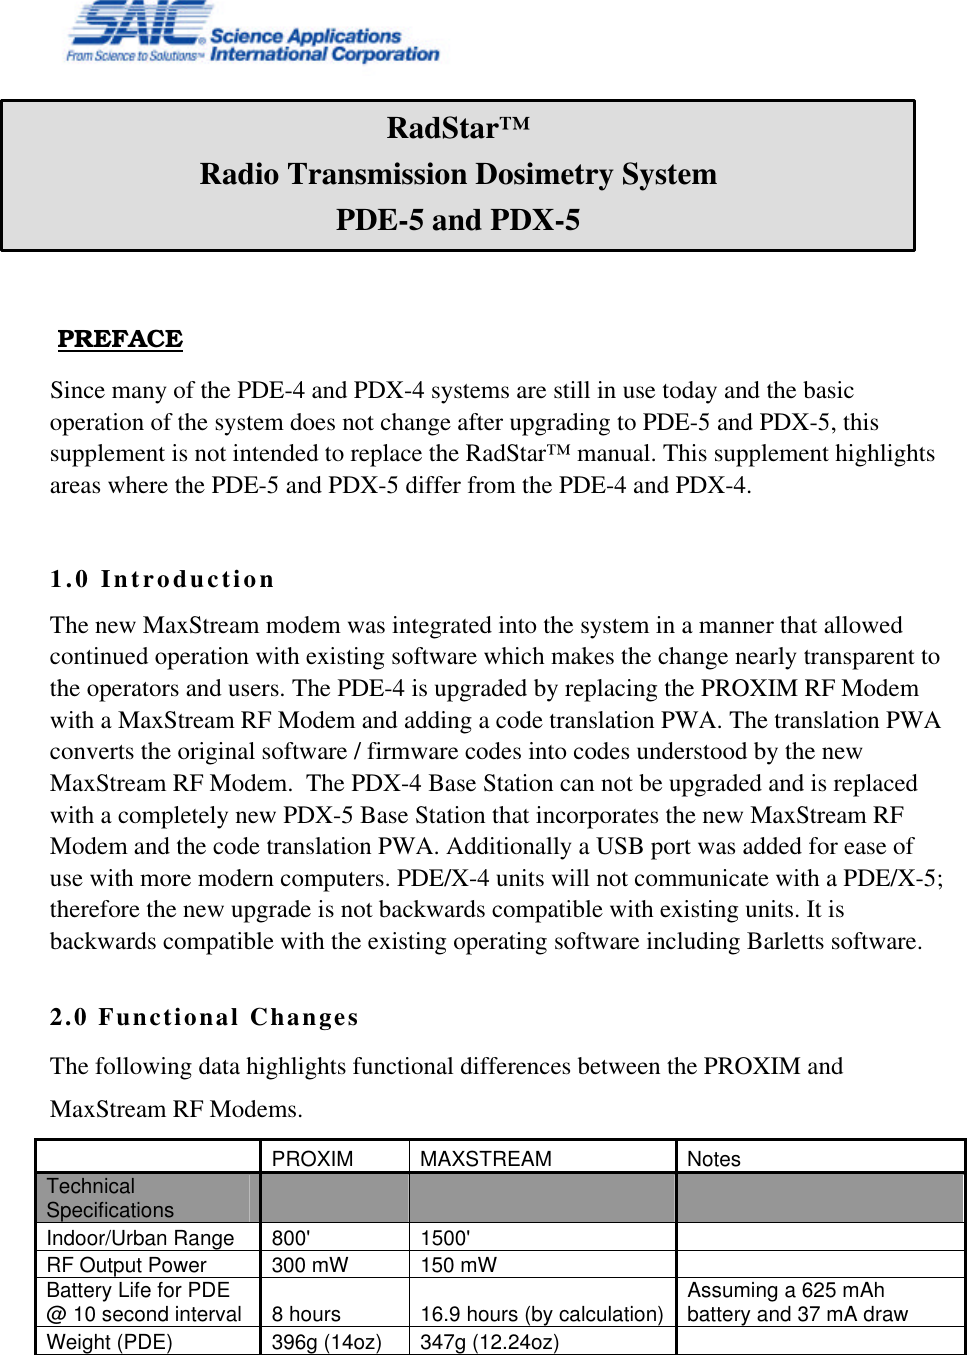     PREFACE Since many of the PDE-4 and PDX-4 systems are still in use today and the basic operation of the system does not change after upgrading to PDE-5 and PDX-5, this supplement is not intended to replace the RadStar™ manual. This supplement highlights areas where the PDE-5 and PDX-5 differ from the PDE-4 and PDX-4.   1.0 Introduction The new MaxStream modem was integrated into the system in a manner that allowed continued operation with existing software which makes the change nearly transparent to the operators and users. The PDE-4 is upgraded by replacing the PROXIM RF Modem with a MaxStream RF Modem and adding a code translation PWA. The translation PWA converts the original software / firmware codes into codes understood by the new MaxStream RF Modem.  The PDX-4 Base Station can not be upgraded and is replaced with a completely new PDX-5 Base Station that incorporates the new MaxStream RF Modem and the code translation PWA. Additionally a USB port was added for ease of use with more modern computers. PDE/X-4 units will not communicate with a PDE/X-5; therefore the new upgrade is not backwards compatible with existing units. It is backwards compatible with the existing operating software including Barletts software.  2.0 Functional Changes The following data highlights functional differences between the PROXIM and MaxStream RF Modems.    PROXIM MAXSTREAM Notes Technical Specifications         Indoor/Urban Range 800&apos; 1500&apos;    RF Output Power 300 mW 150 mW    Battery Life for PDE @ 10 second interval 8 hours 16.9 hours (by calculation) Assuming a 625 mAh battery and 37 mA draw Weight (PDE) 396g (14oz) 347g (12.24oz)     RadStar™ Radio Transmission Dosimetry System PDE-5 and PDX-5 Manual Supplement 